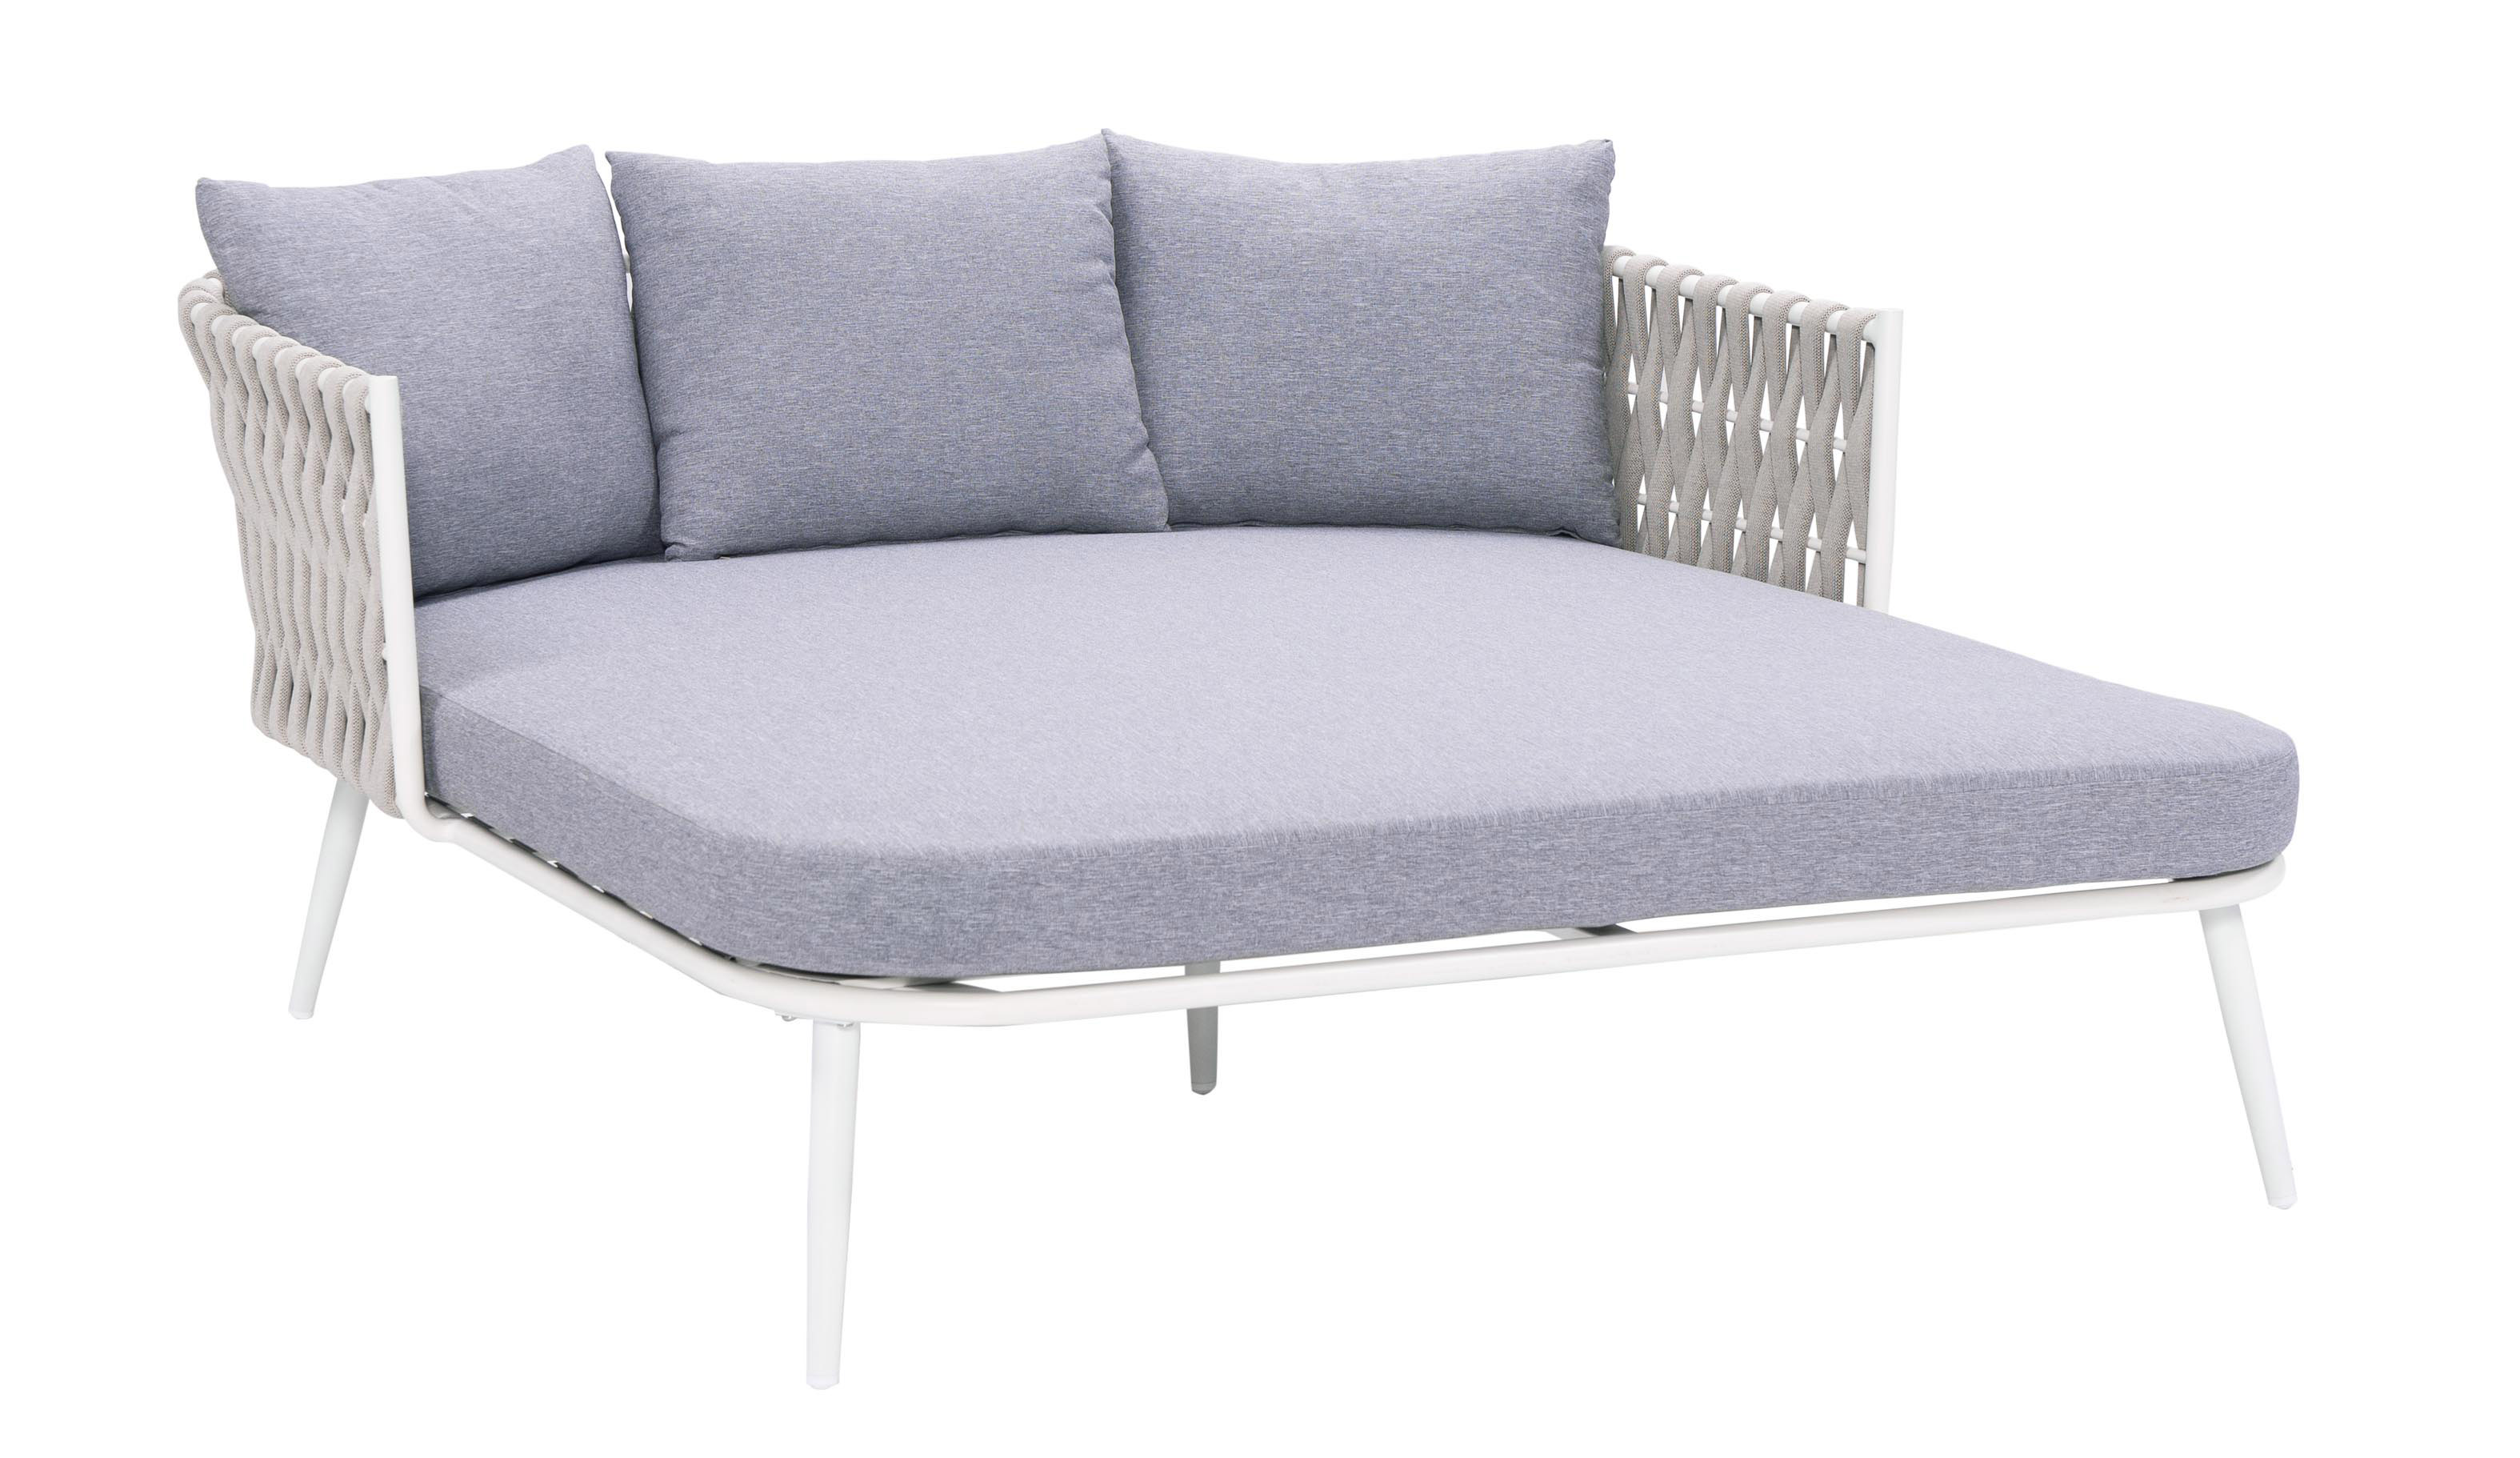 Art double daybed D1